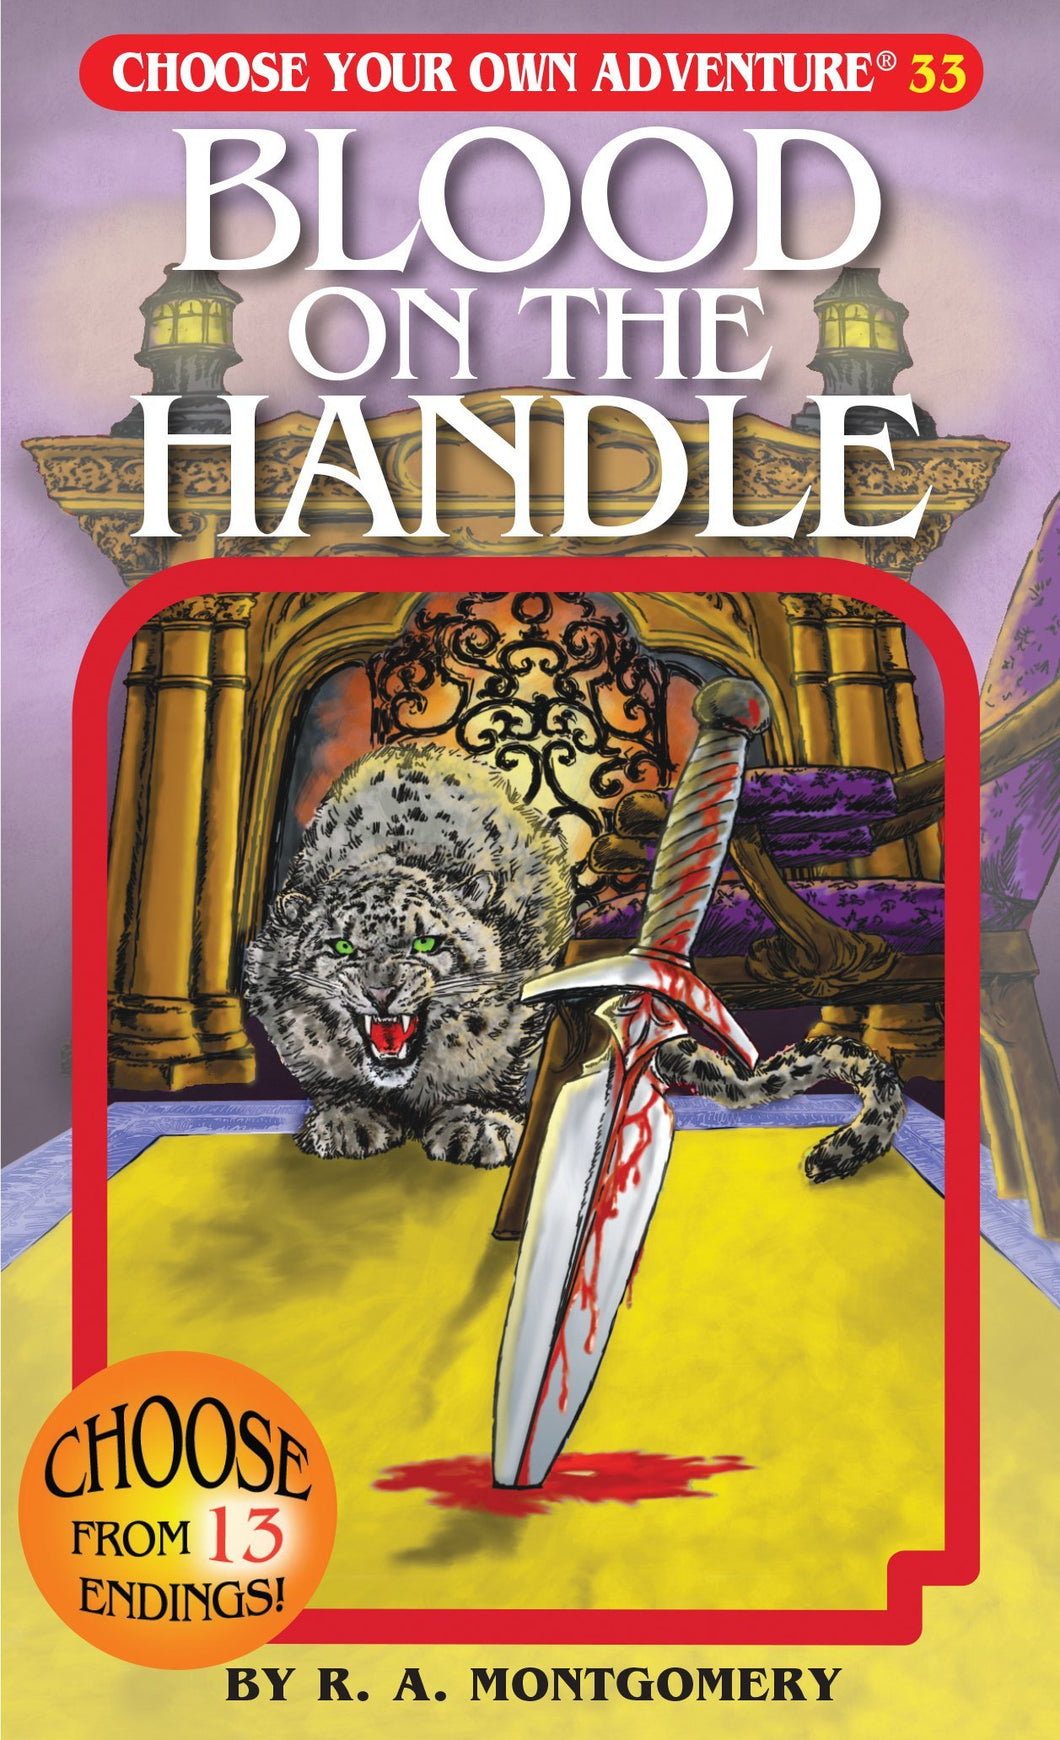 Choose Your Own Adventure Book-Blood on the Handle #33